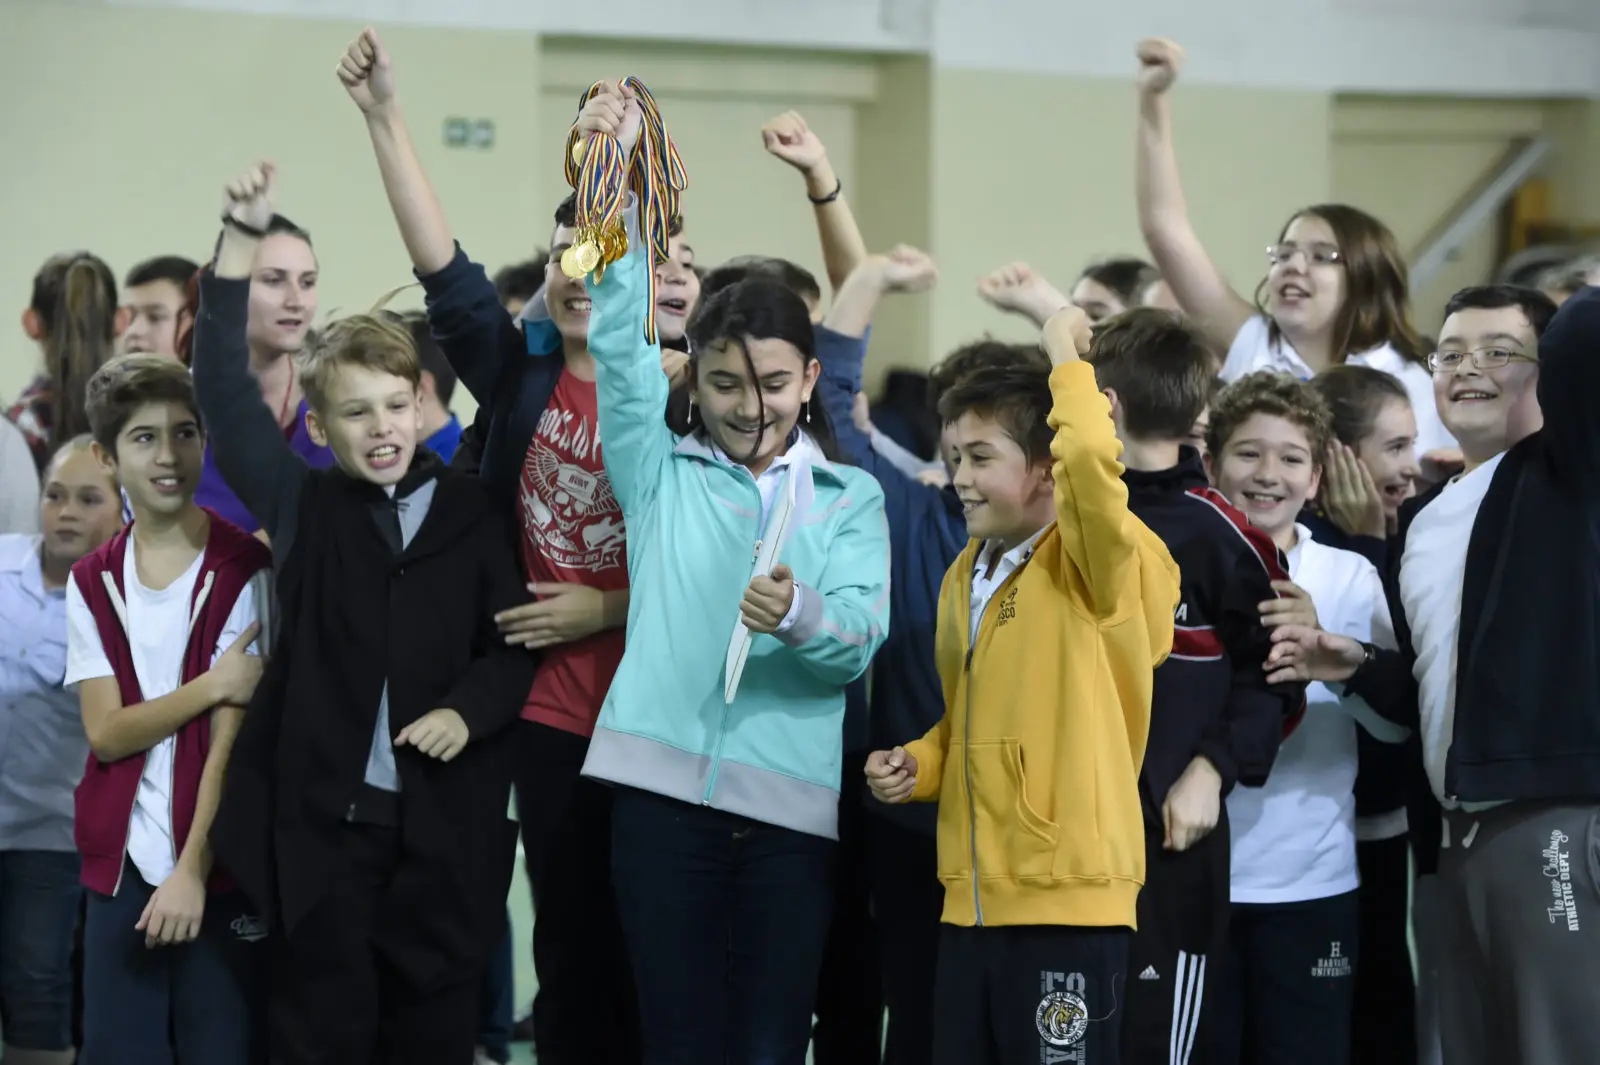 Romanian children partaking in physical activity. A young girl is holding a handful of gold medals